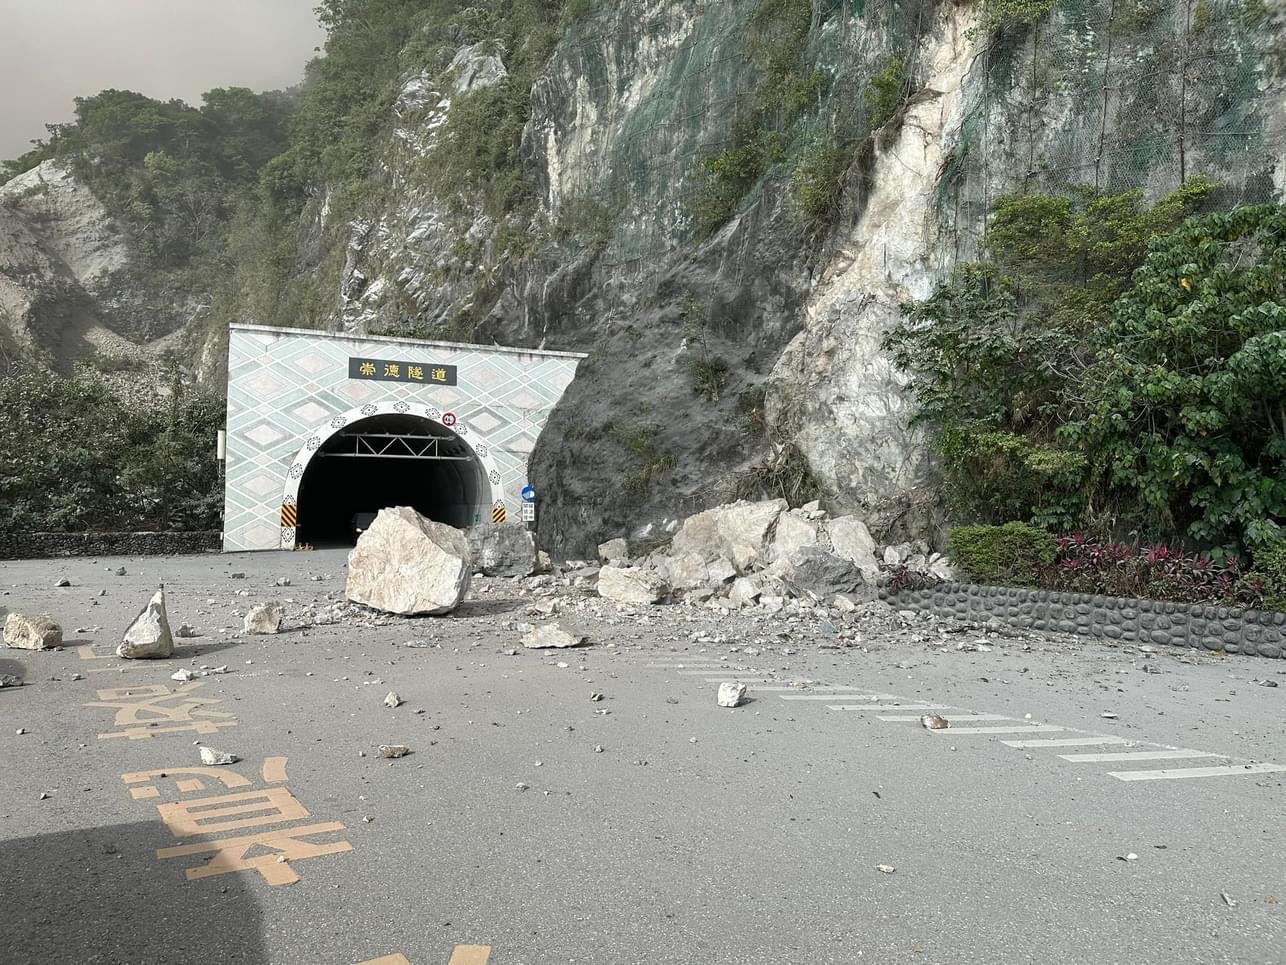 In pictures: Magnitude-7.3 quake hits China's Taiwan region